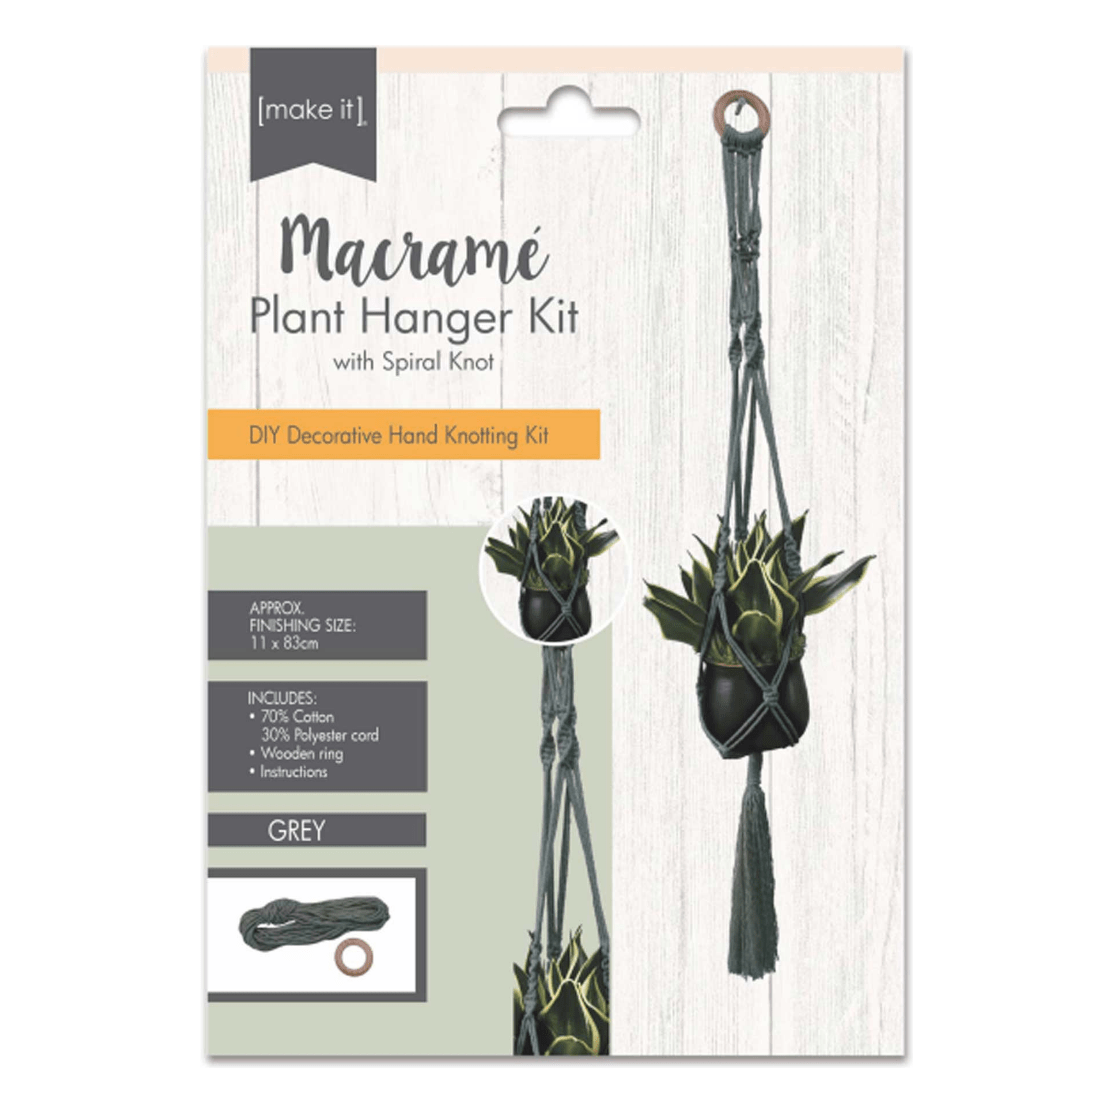 Macrame Plant Hanger Kit with Spiral Knot - Grey